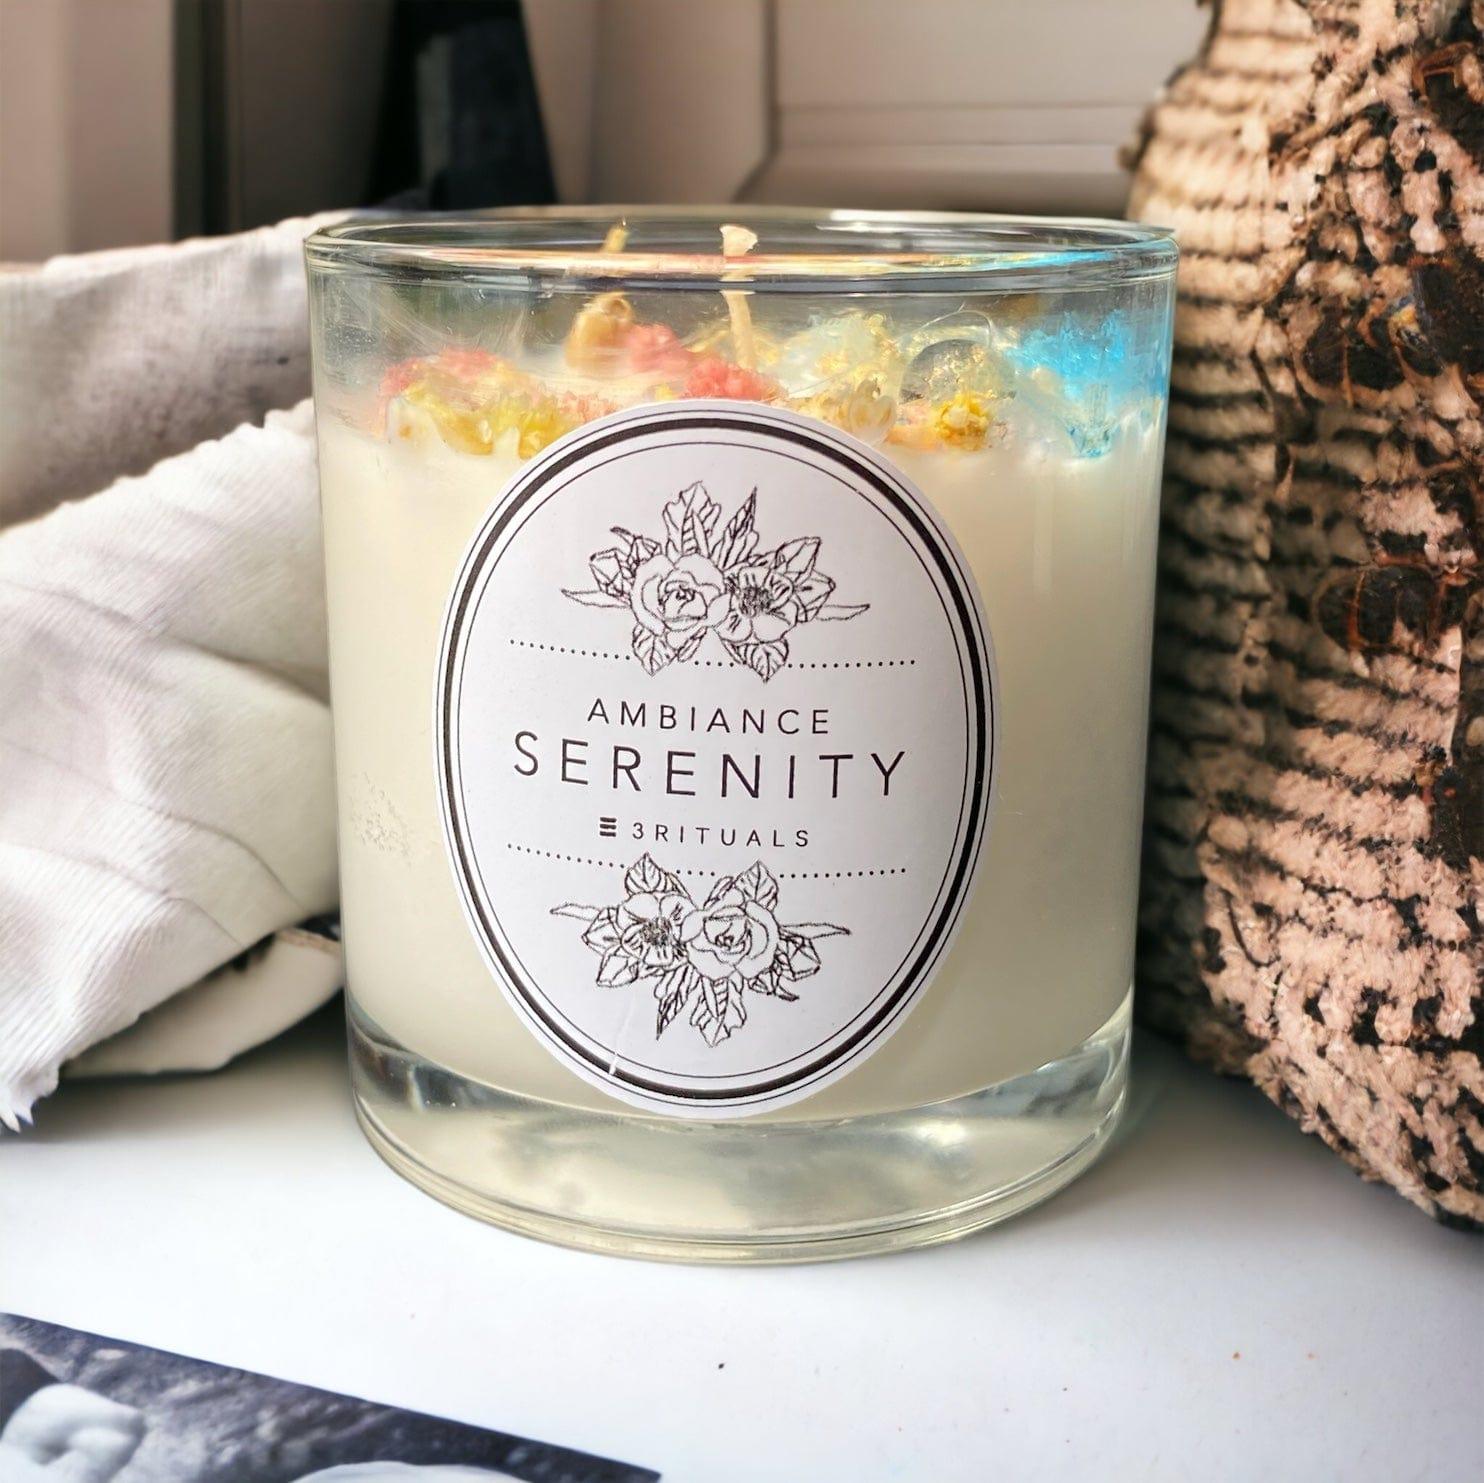 SERENITY Soy Wax Candle - 3Rituals